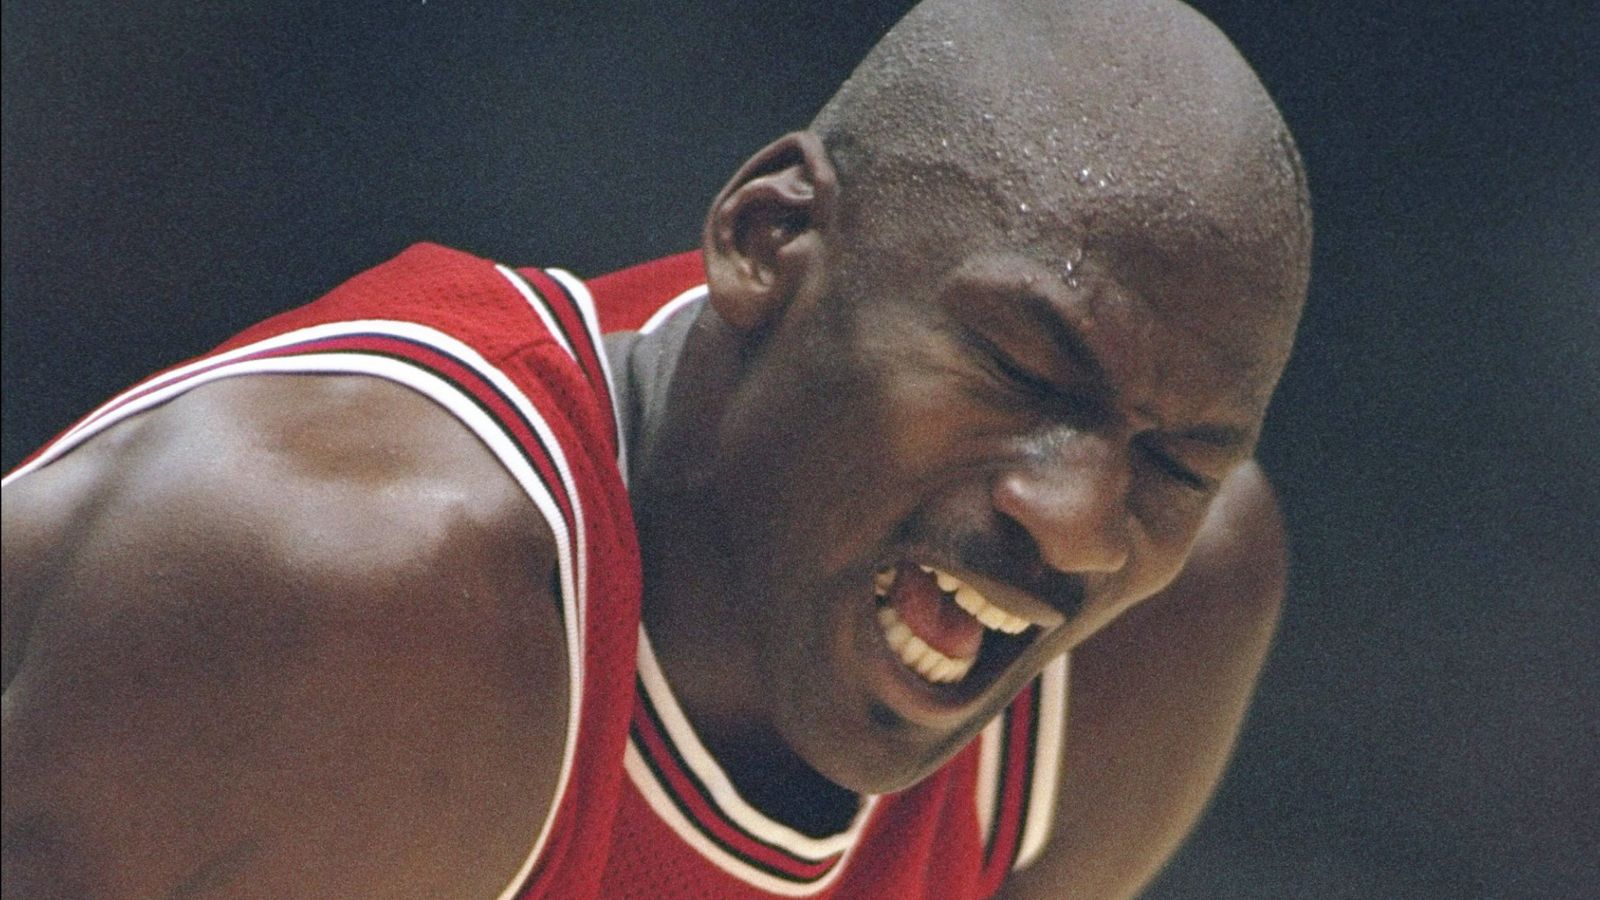 Michael Jordan Vented About His Teammates Not Taking Him Seriously